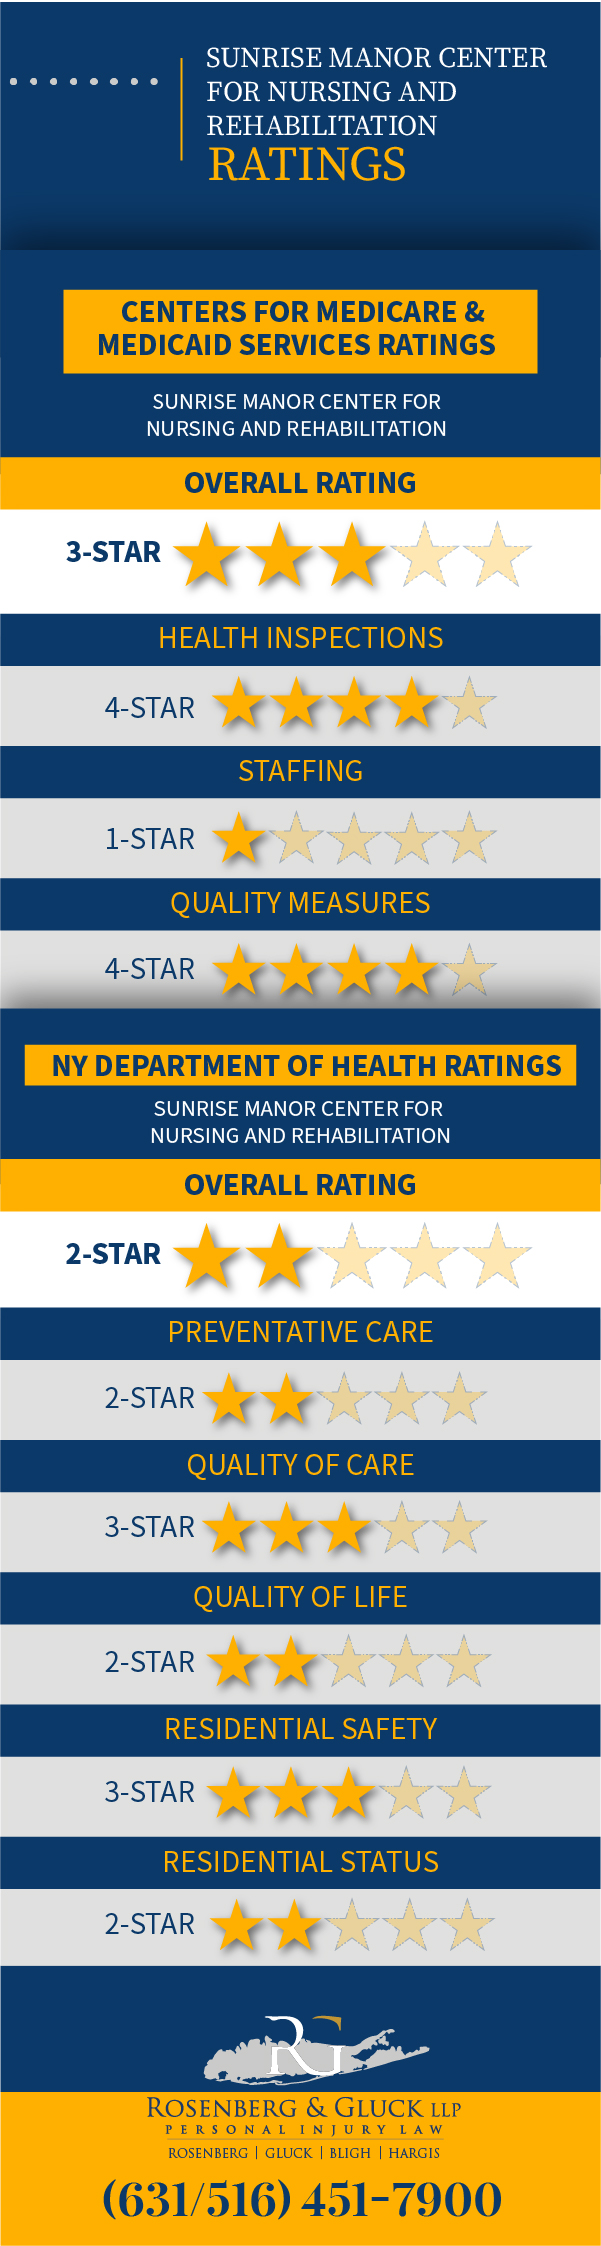 Sunrise Manor Center for Nursing and Rehabilitation Violations and Ratings Infographic